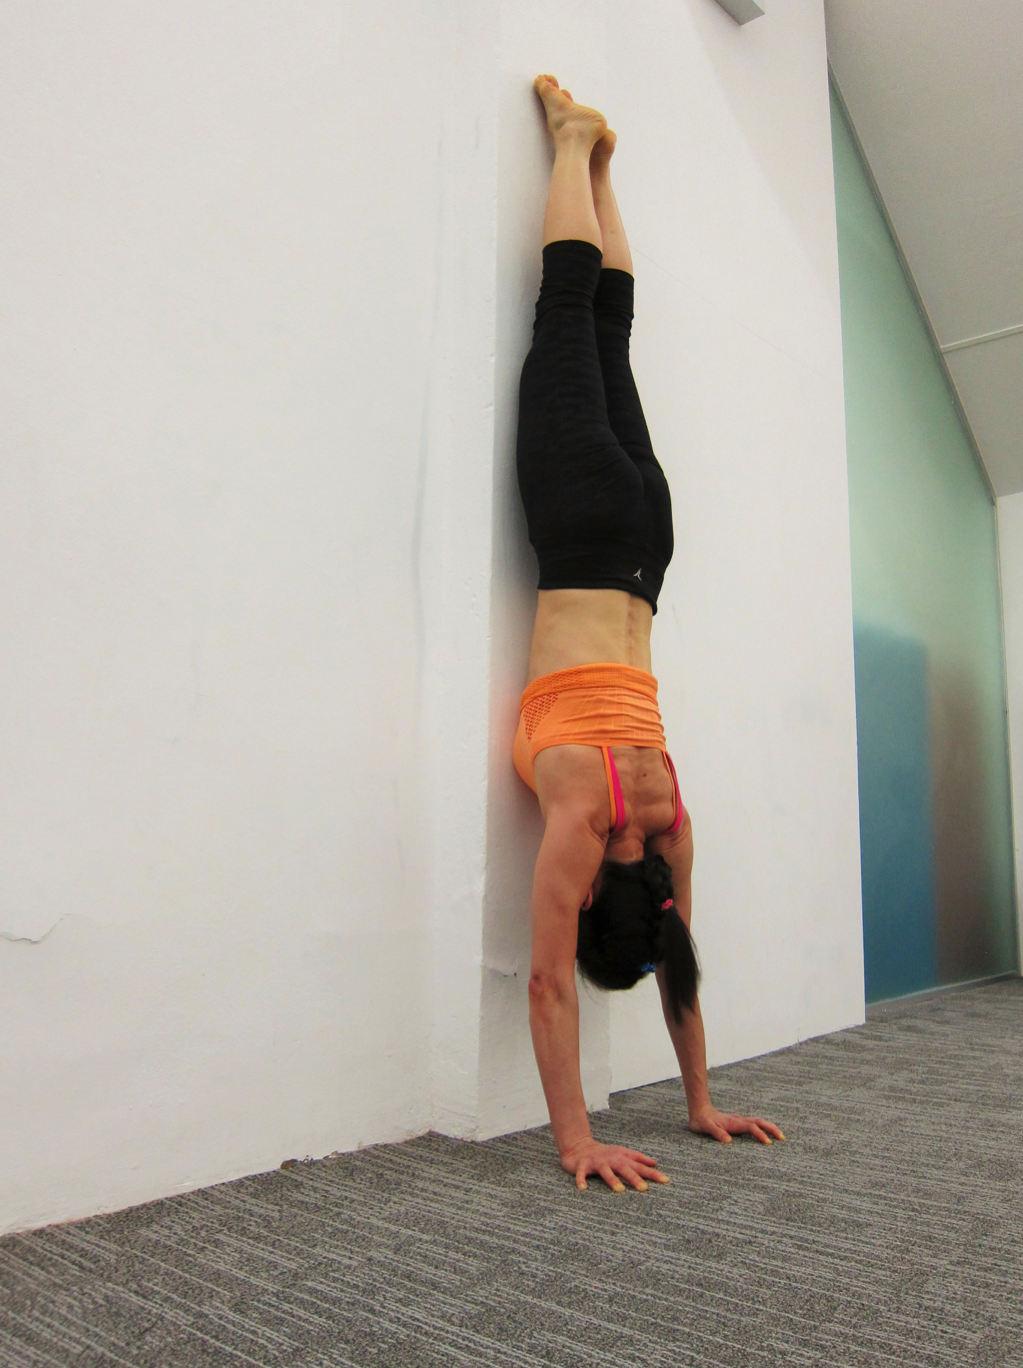 8. Wall handstand Strengthen Shoulder girdle stabilizers and the arm while activating the Back and Core stabilizer muscles Kneel on all fours placing hands flat on floor.